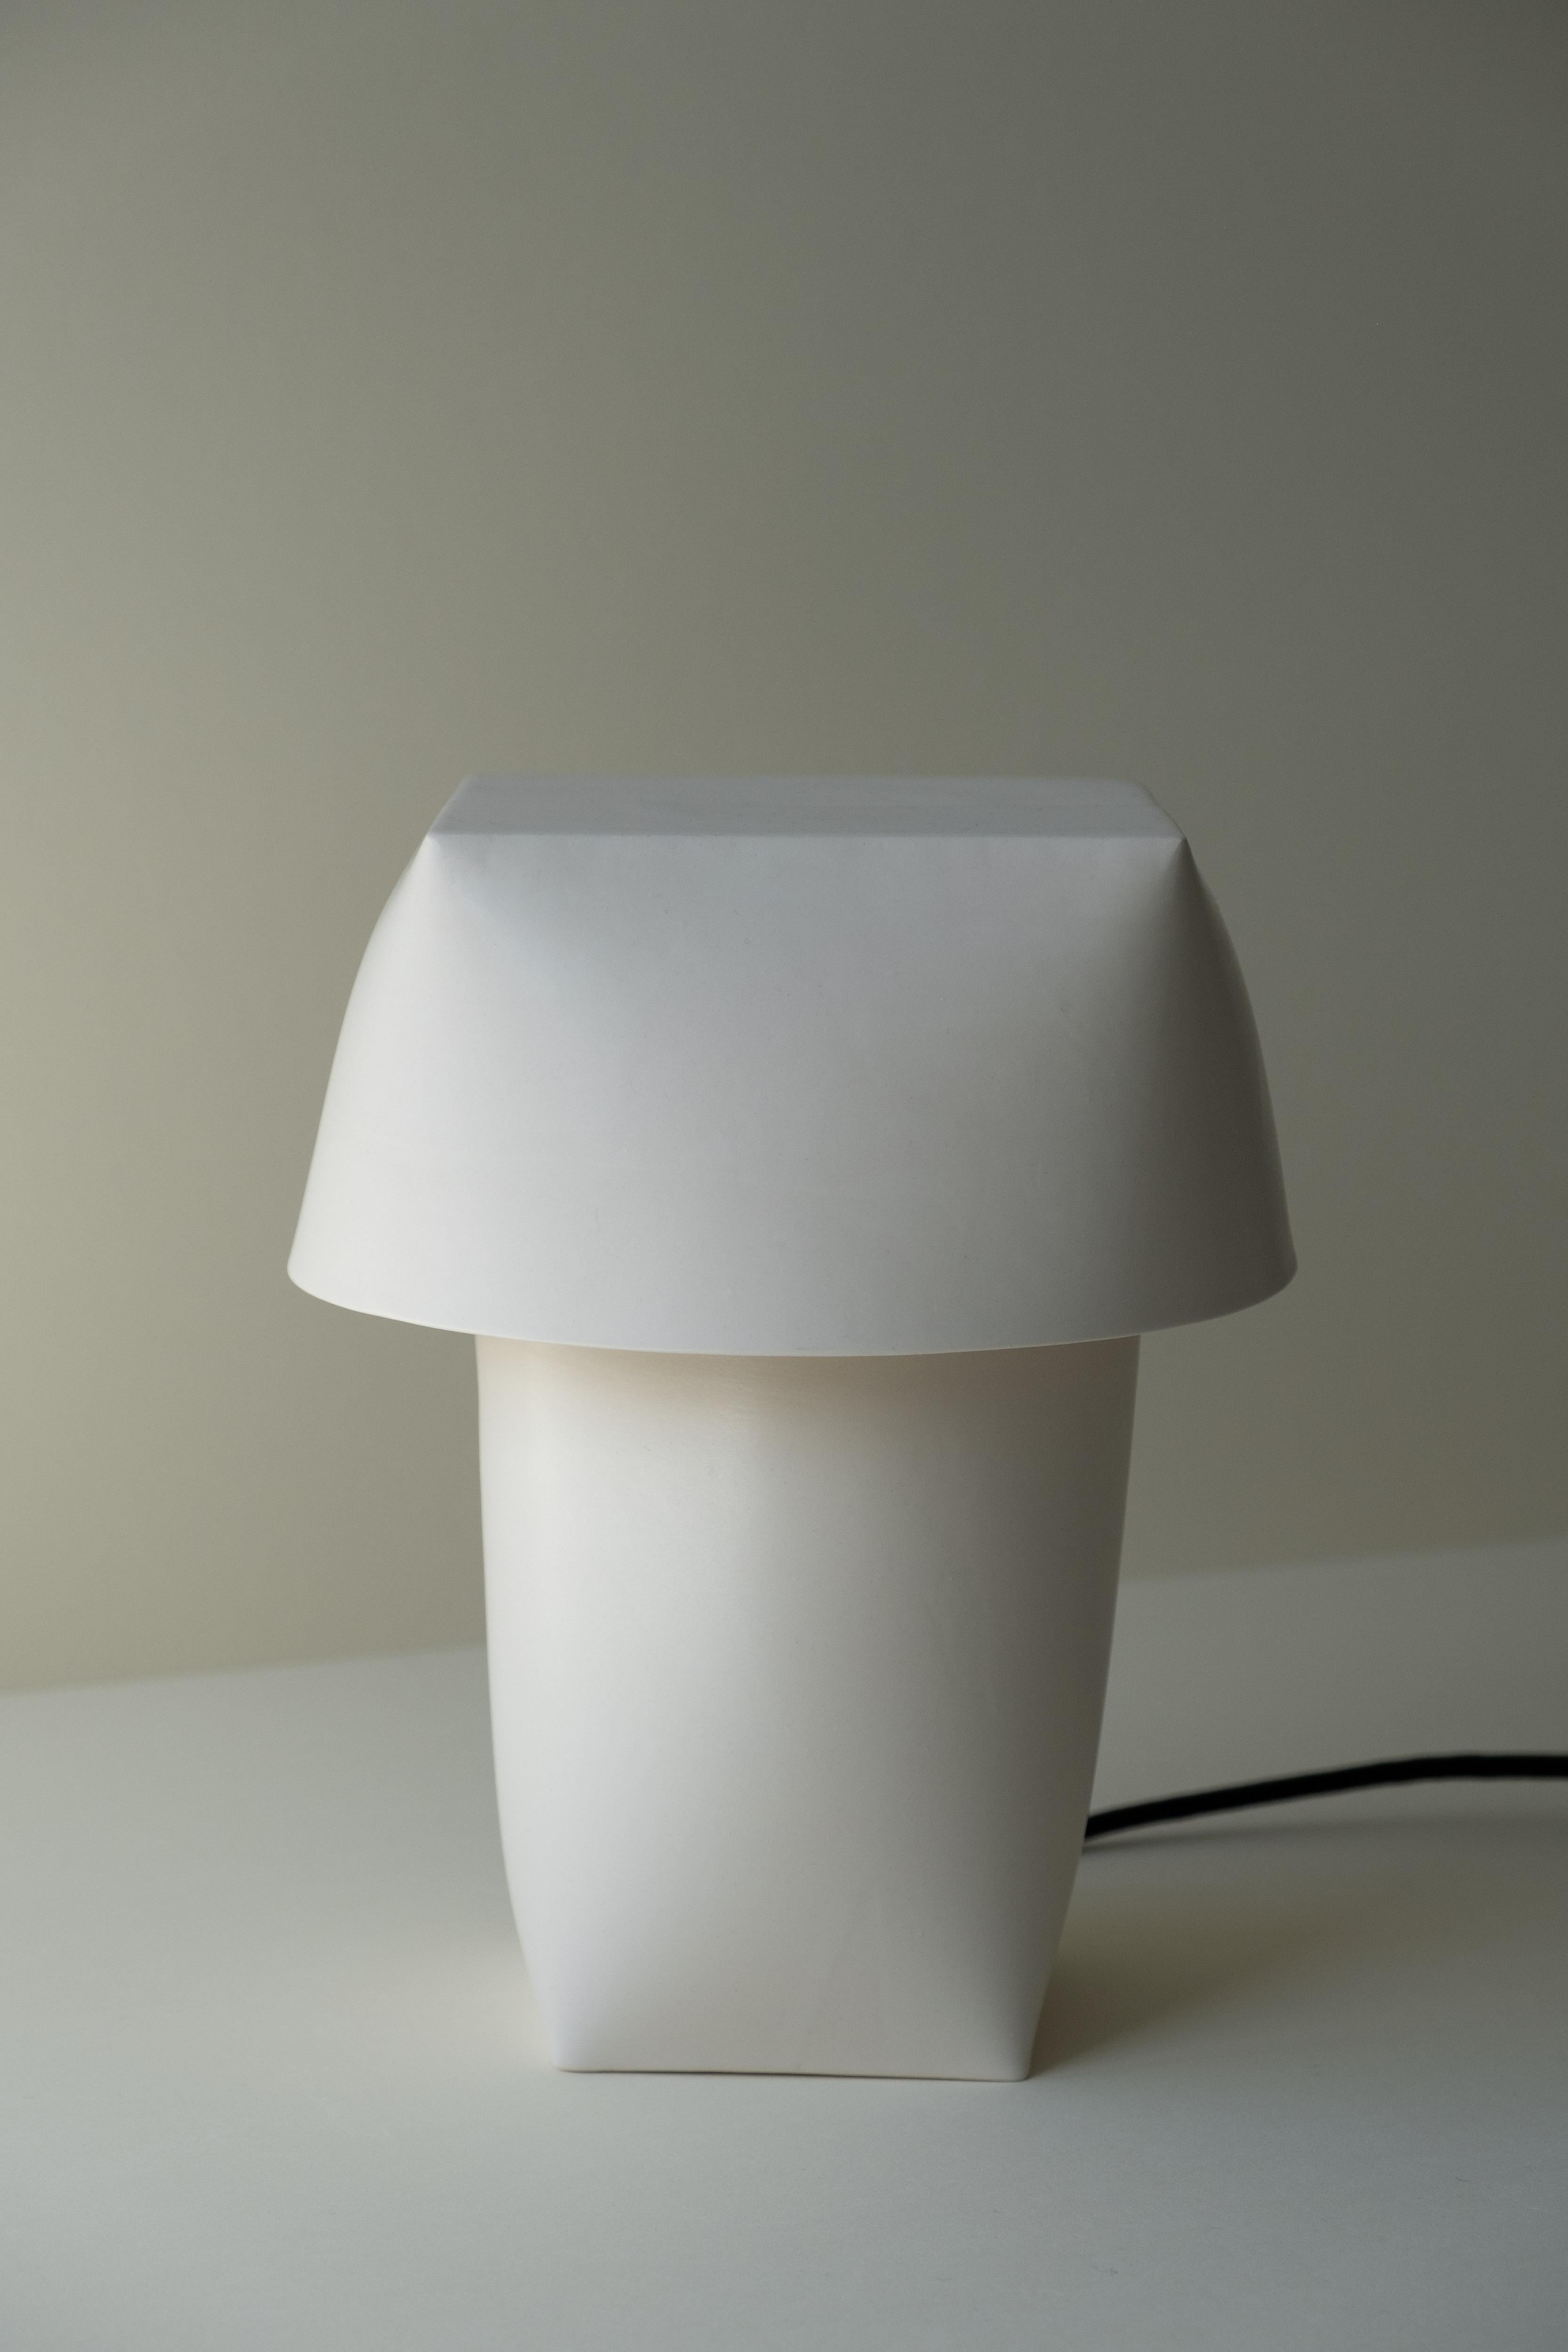 Flexible Formed Table Lamp by Rino Claessens
Dimensions: D 20.5 x W 20.5 x H 25 cm.
Materials: Glazed ceramic, stainless steel and electric components.
Finish: Ivory glaze.
Technical Specification :
E27 fitting. 4,8W 220V-240V 2700K mat bulb